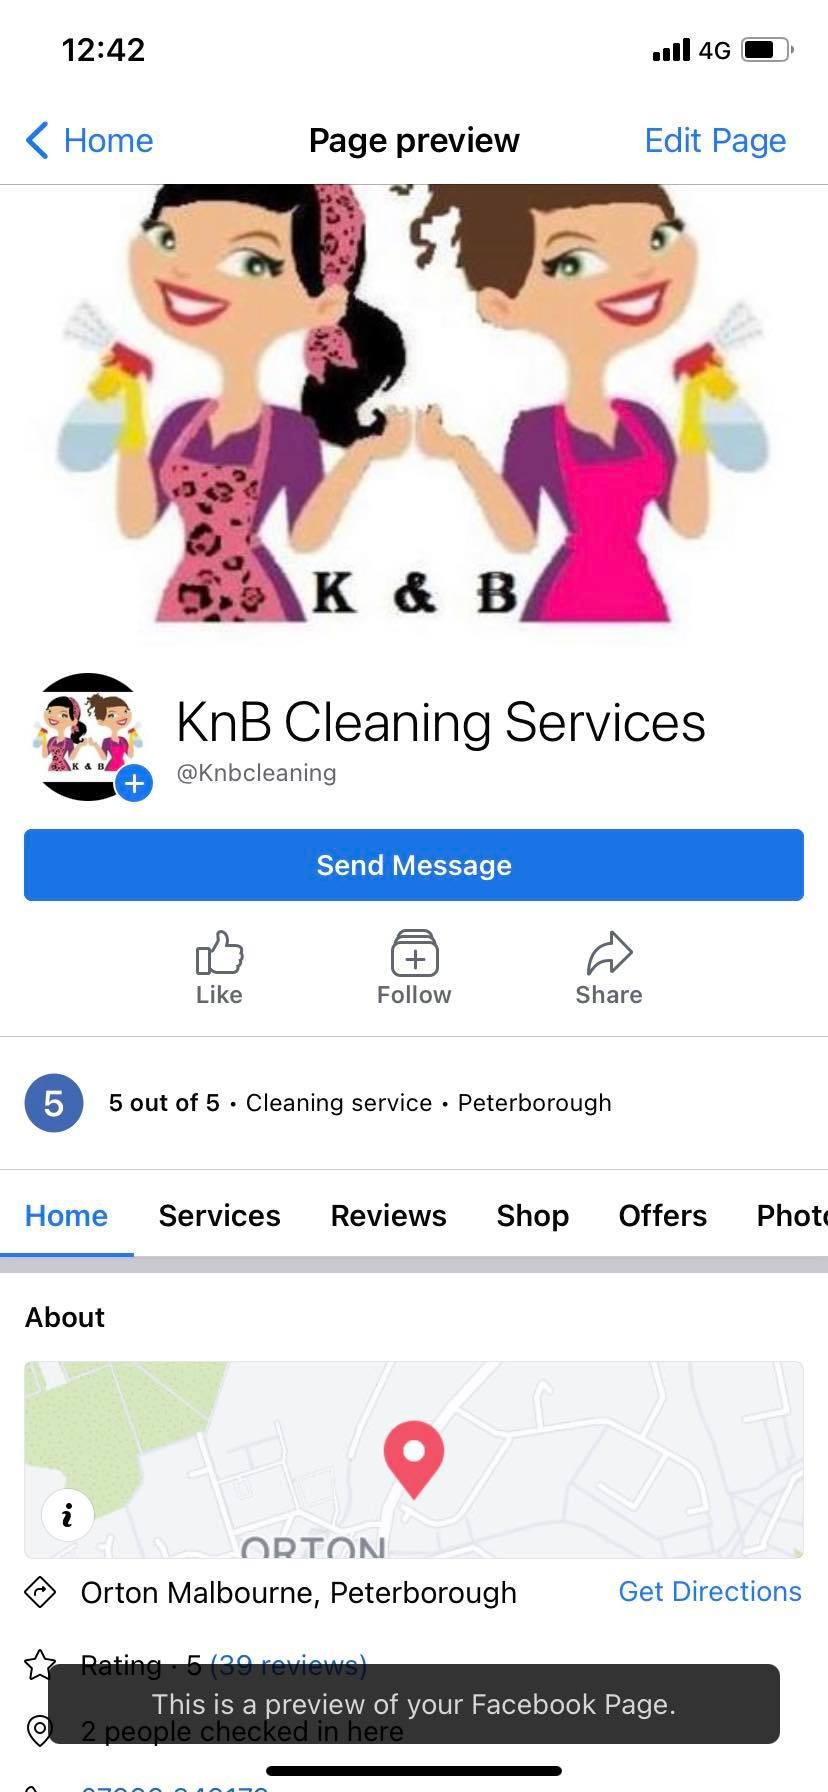 Full house clean donated by KnB cleaning